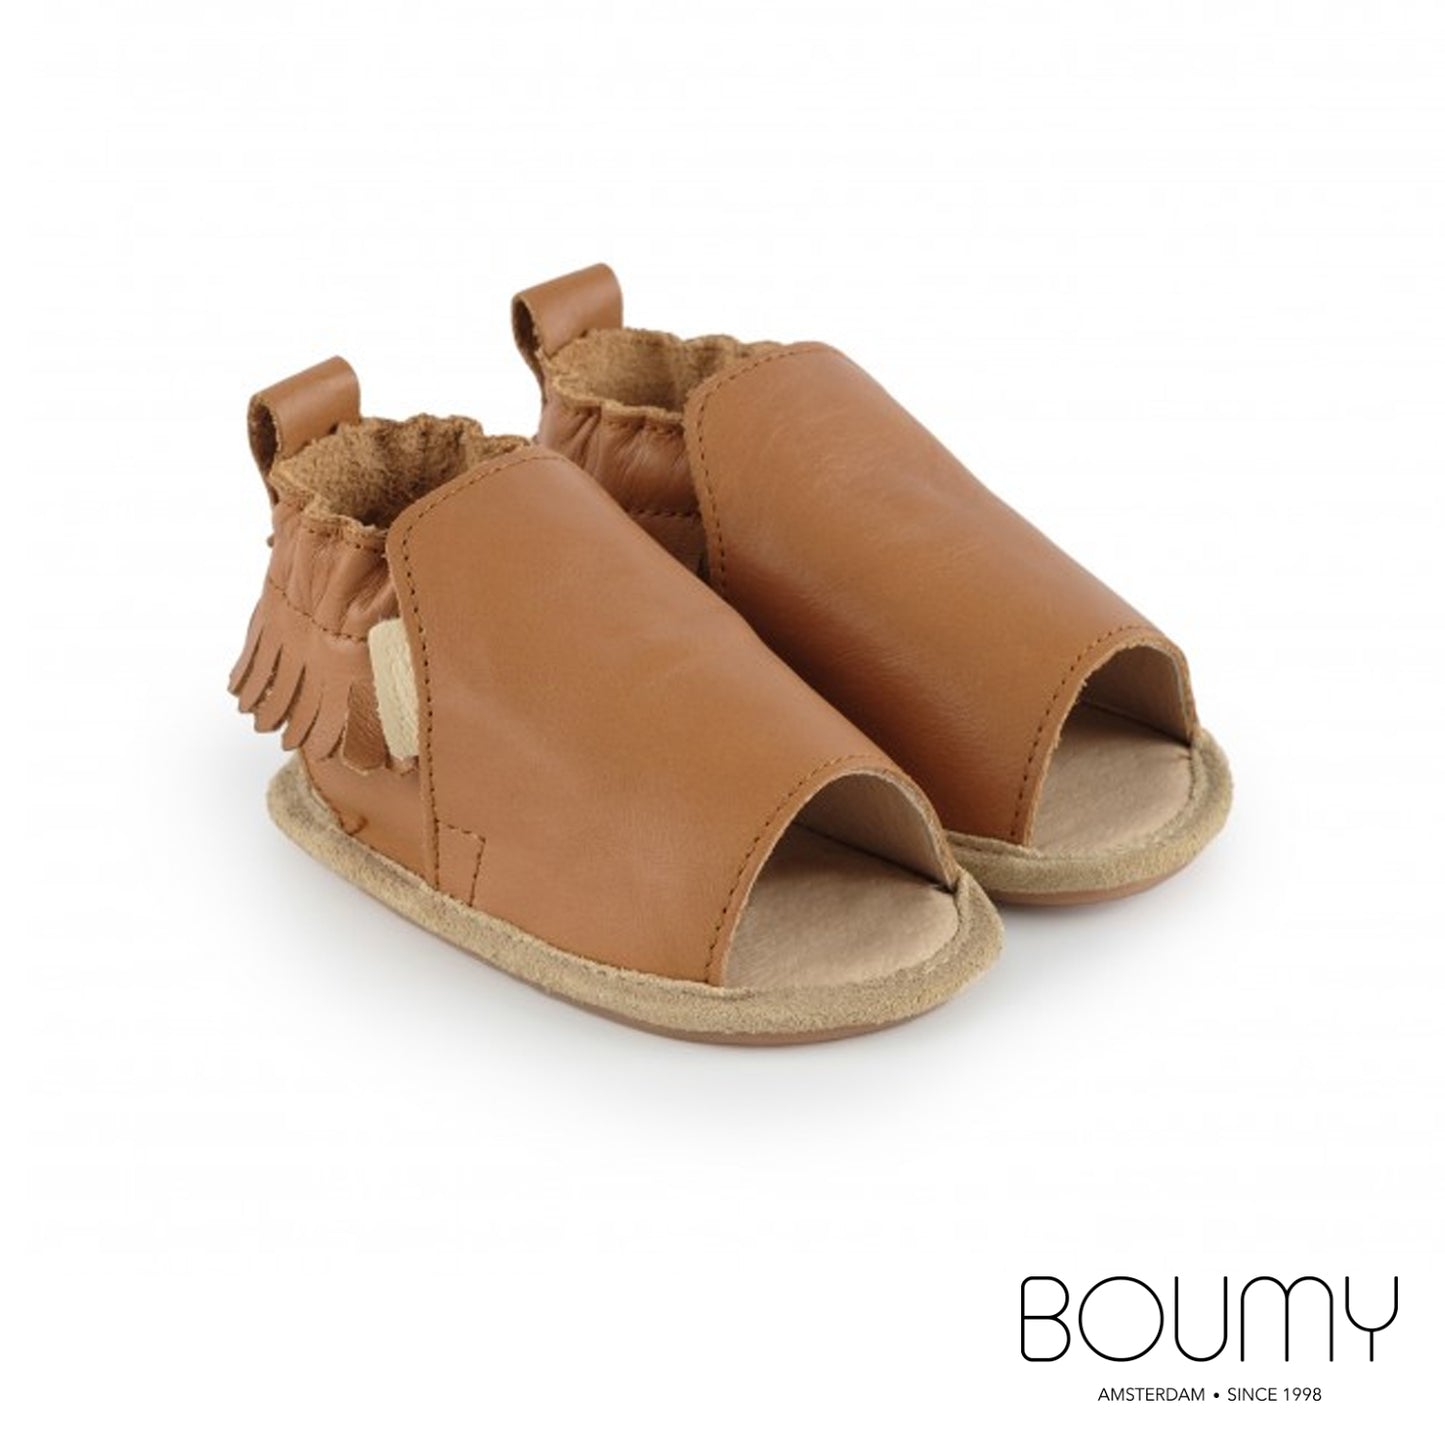 Boumy - Noa Sandal in Genuine Leather